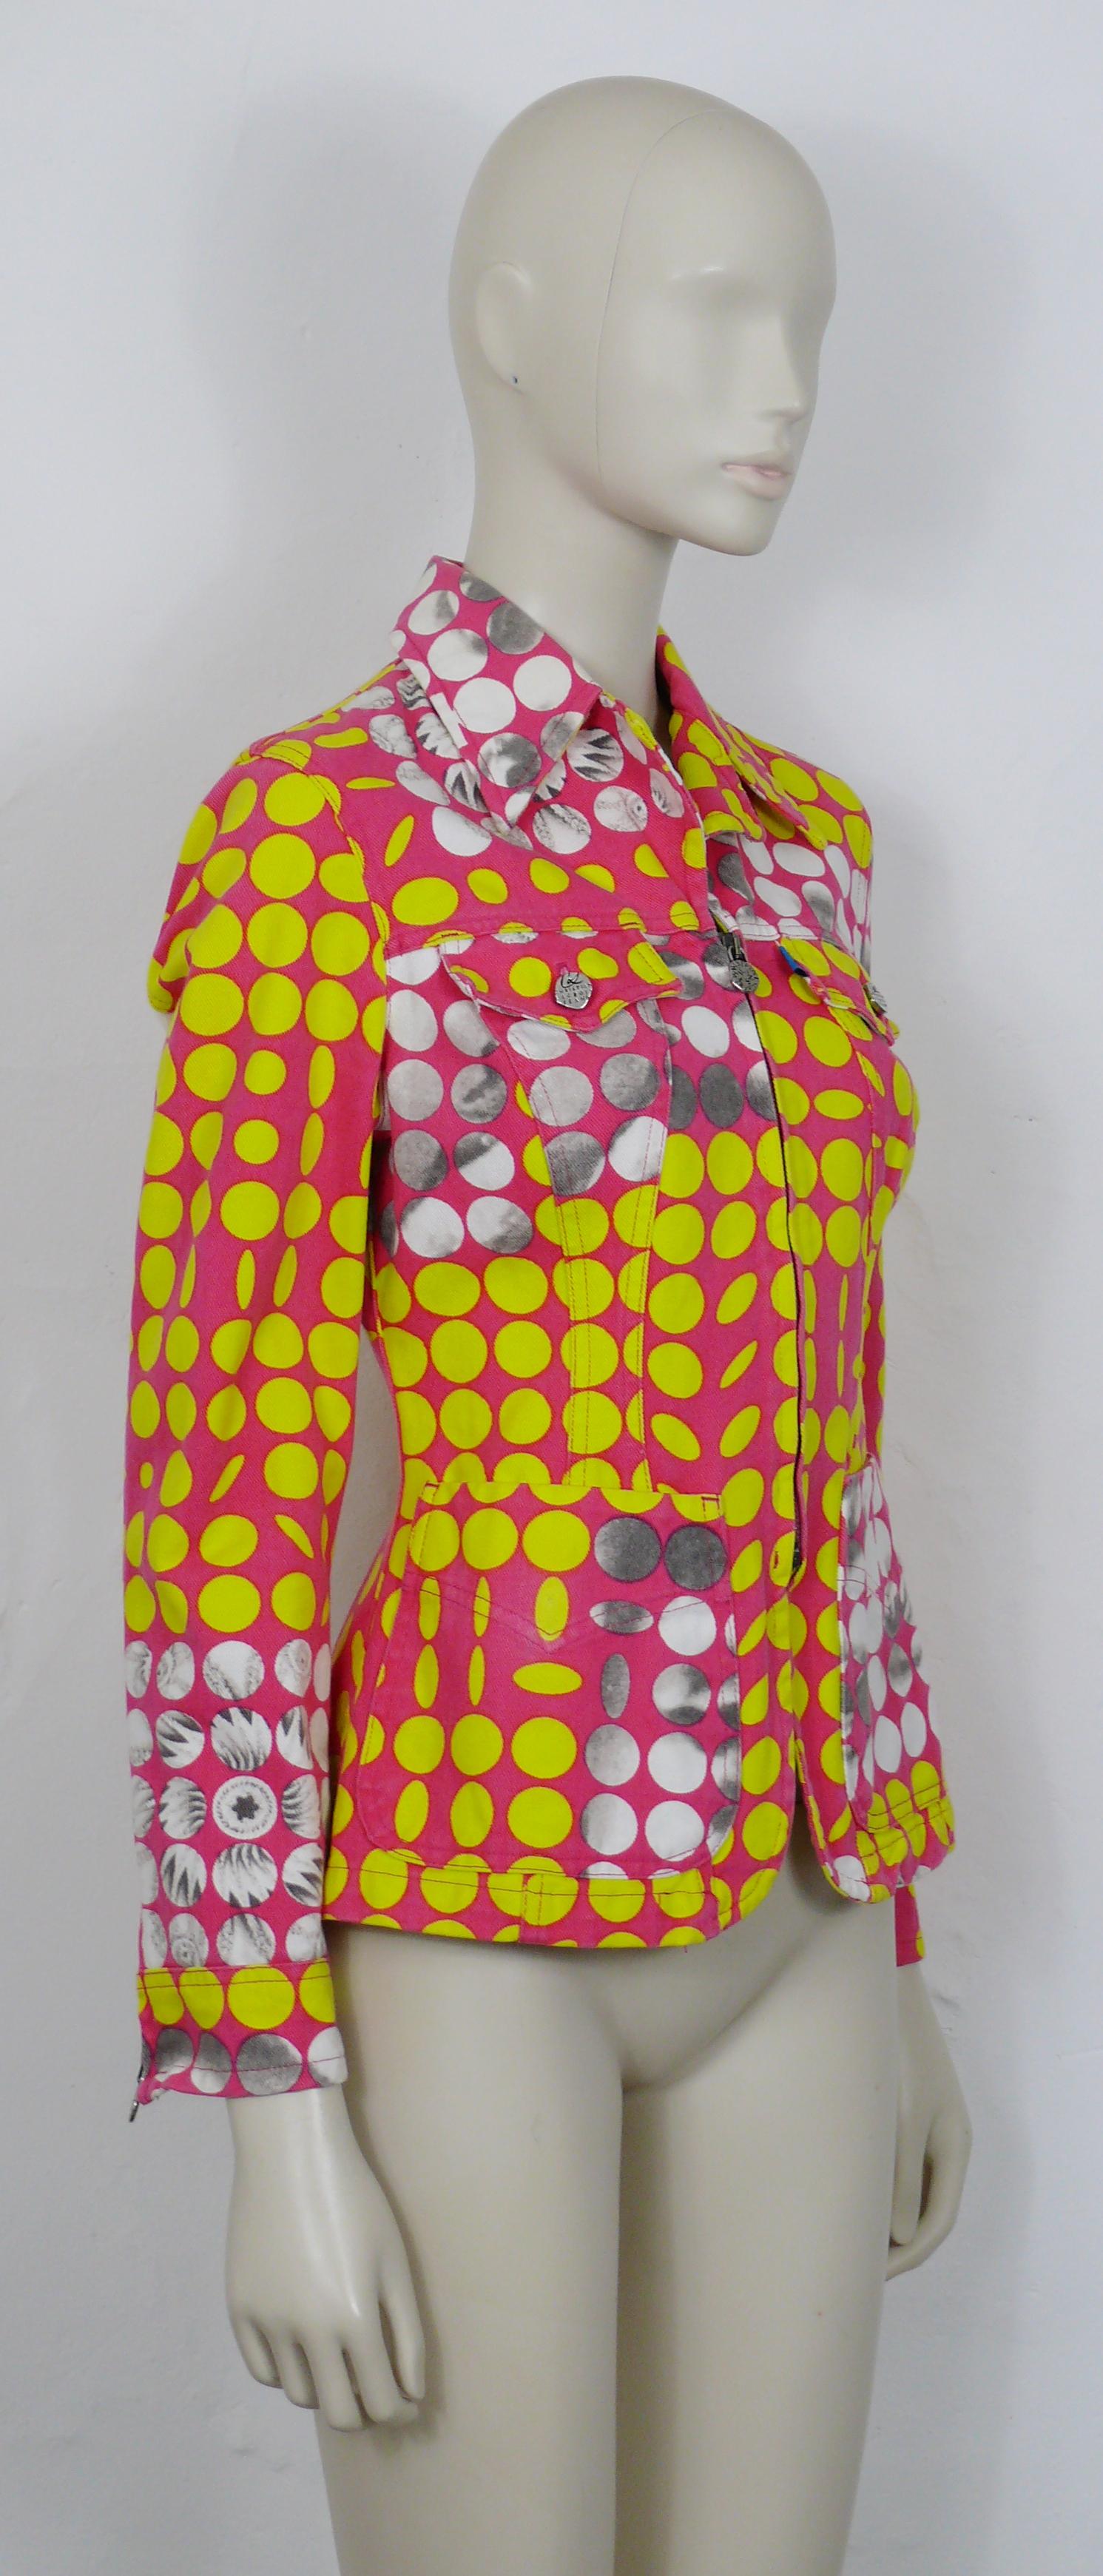 CHRISTIAN LACROIX vintage colourful Op Art print cotton jacket.

This jacket features :
- Multicolor polka dot print in yellow/white/grey on a pink background.
- Op art illusion featuring parts of faces and flowers appearing (if you look at the